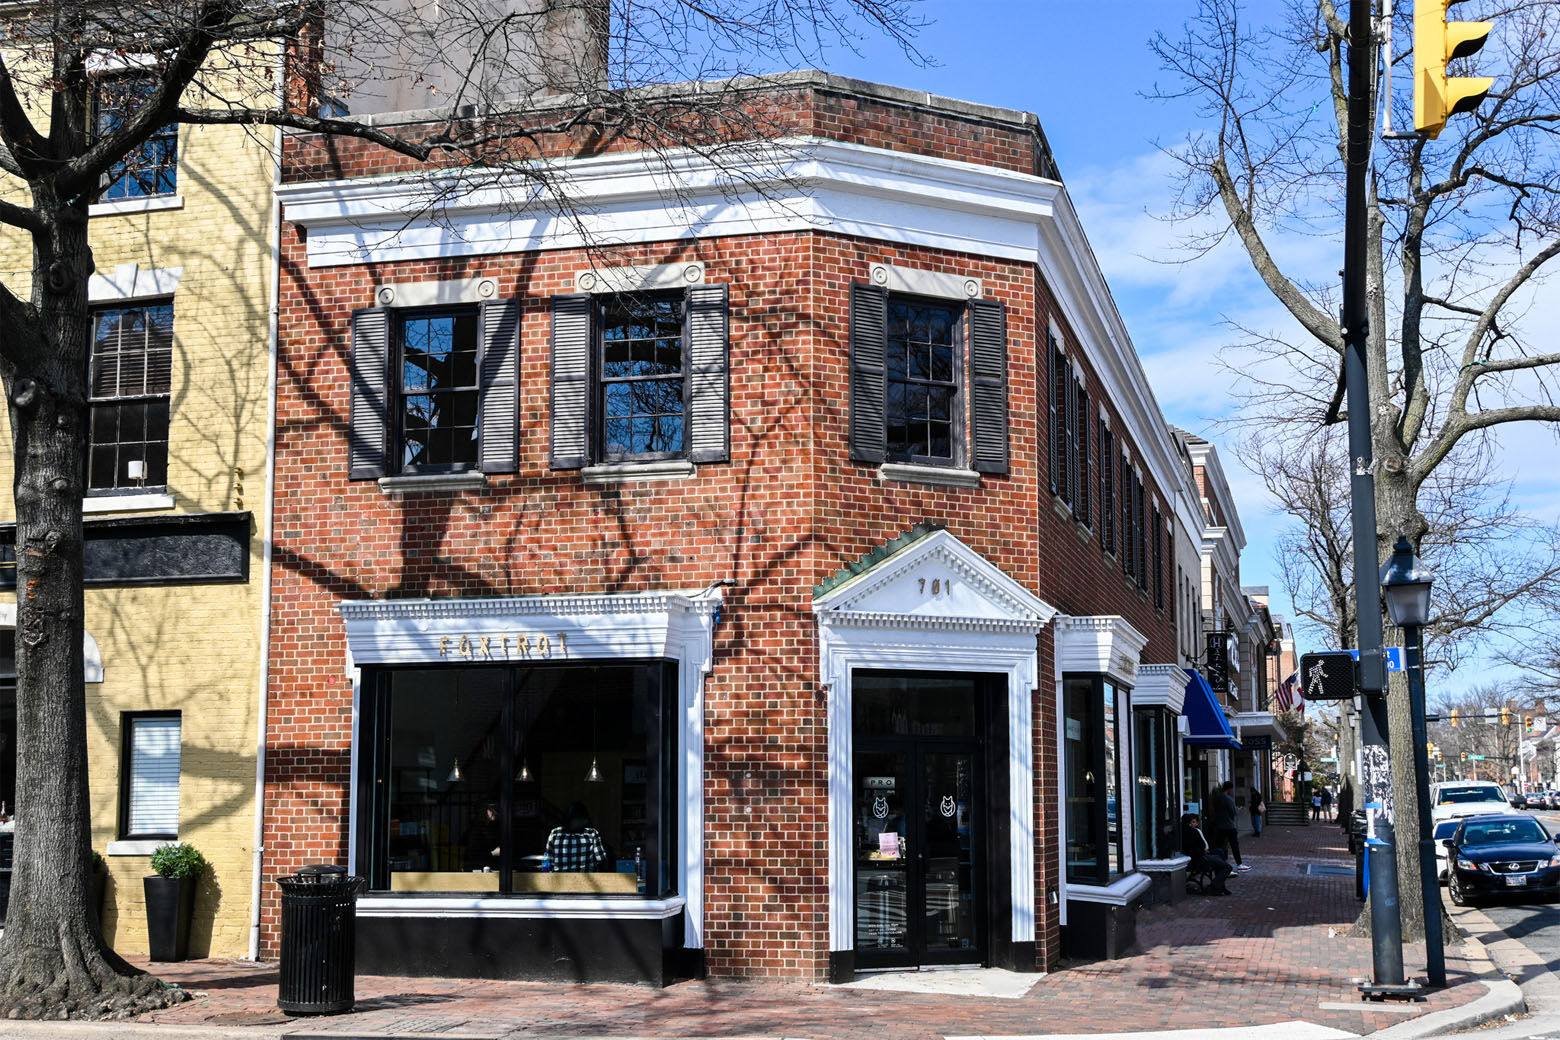 Chicago-based Foxtrot Market continues its D.C.-area expansion, opening its first location in Northern Virginia in Alexandria’s Old Town. (Courtesy Foxtrot)